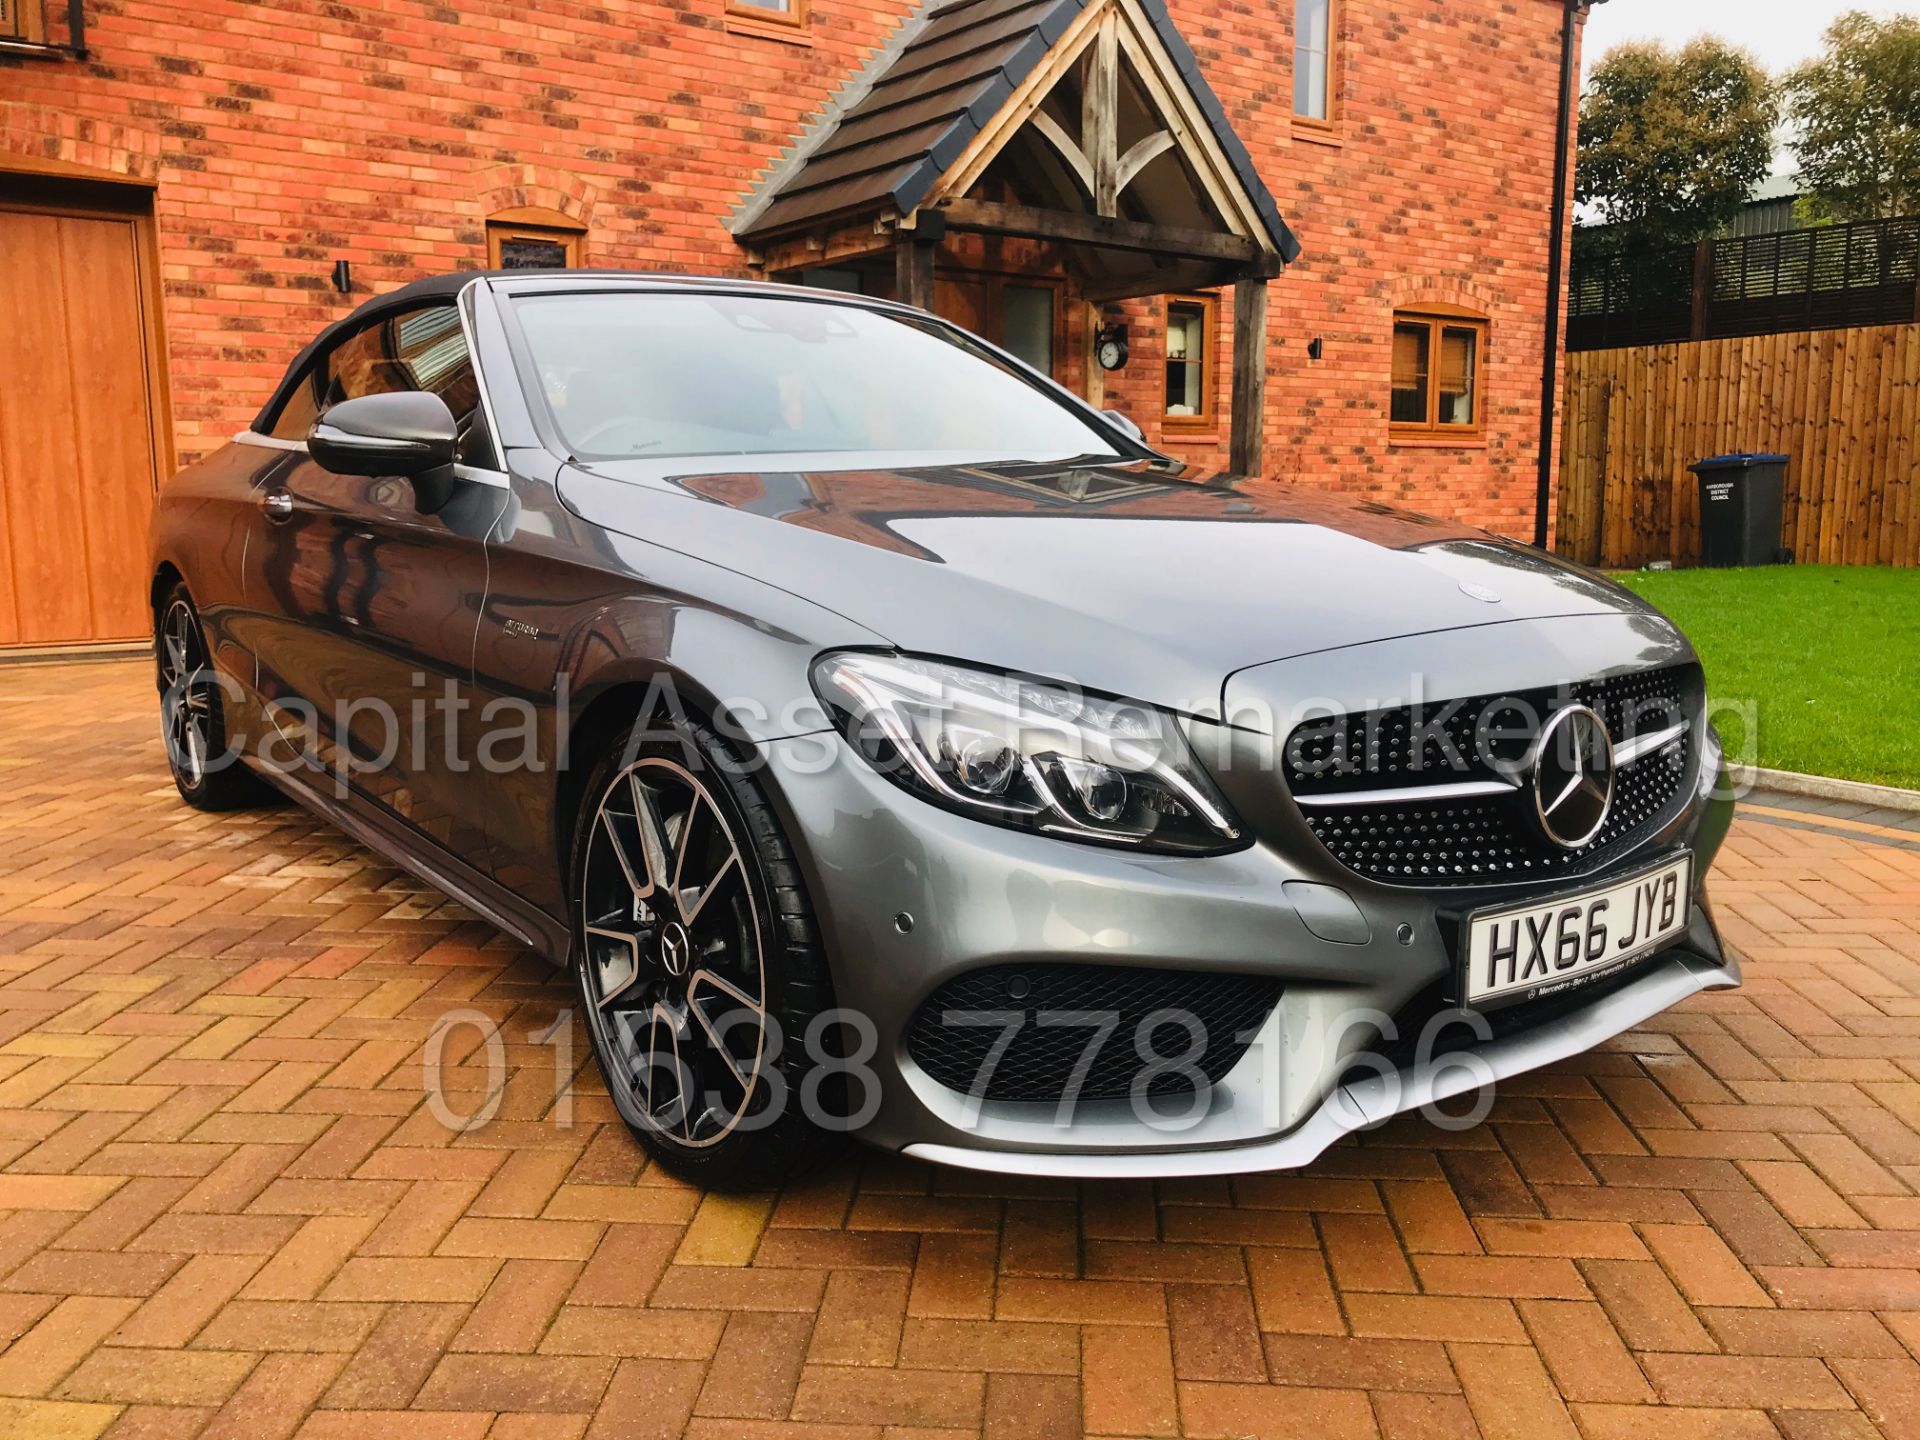 ON SALE MERCEDES-BENZ C43 *AMG BI-TURBO* CABRIOLET (2017) '3.0 V6 - 367 BHP - 4 MATIC - 9 SPEED AUTO - Image 7 of 59